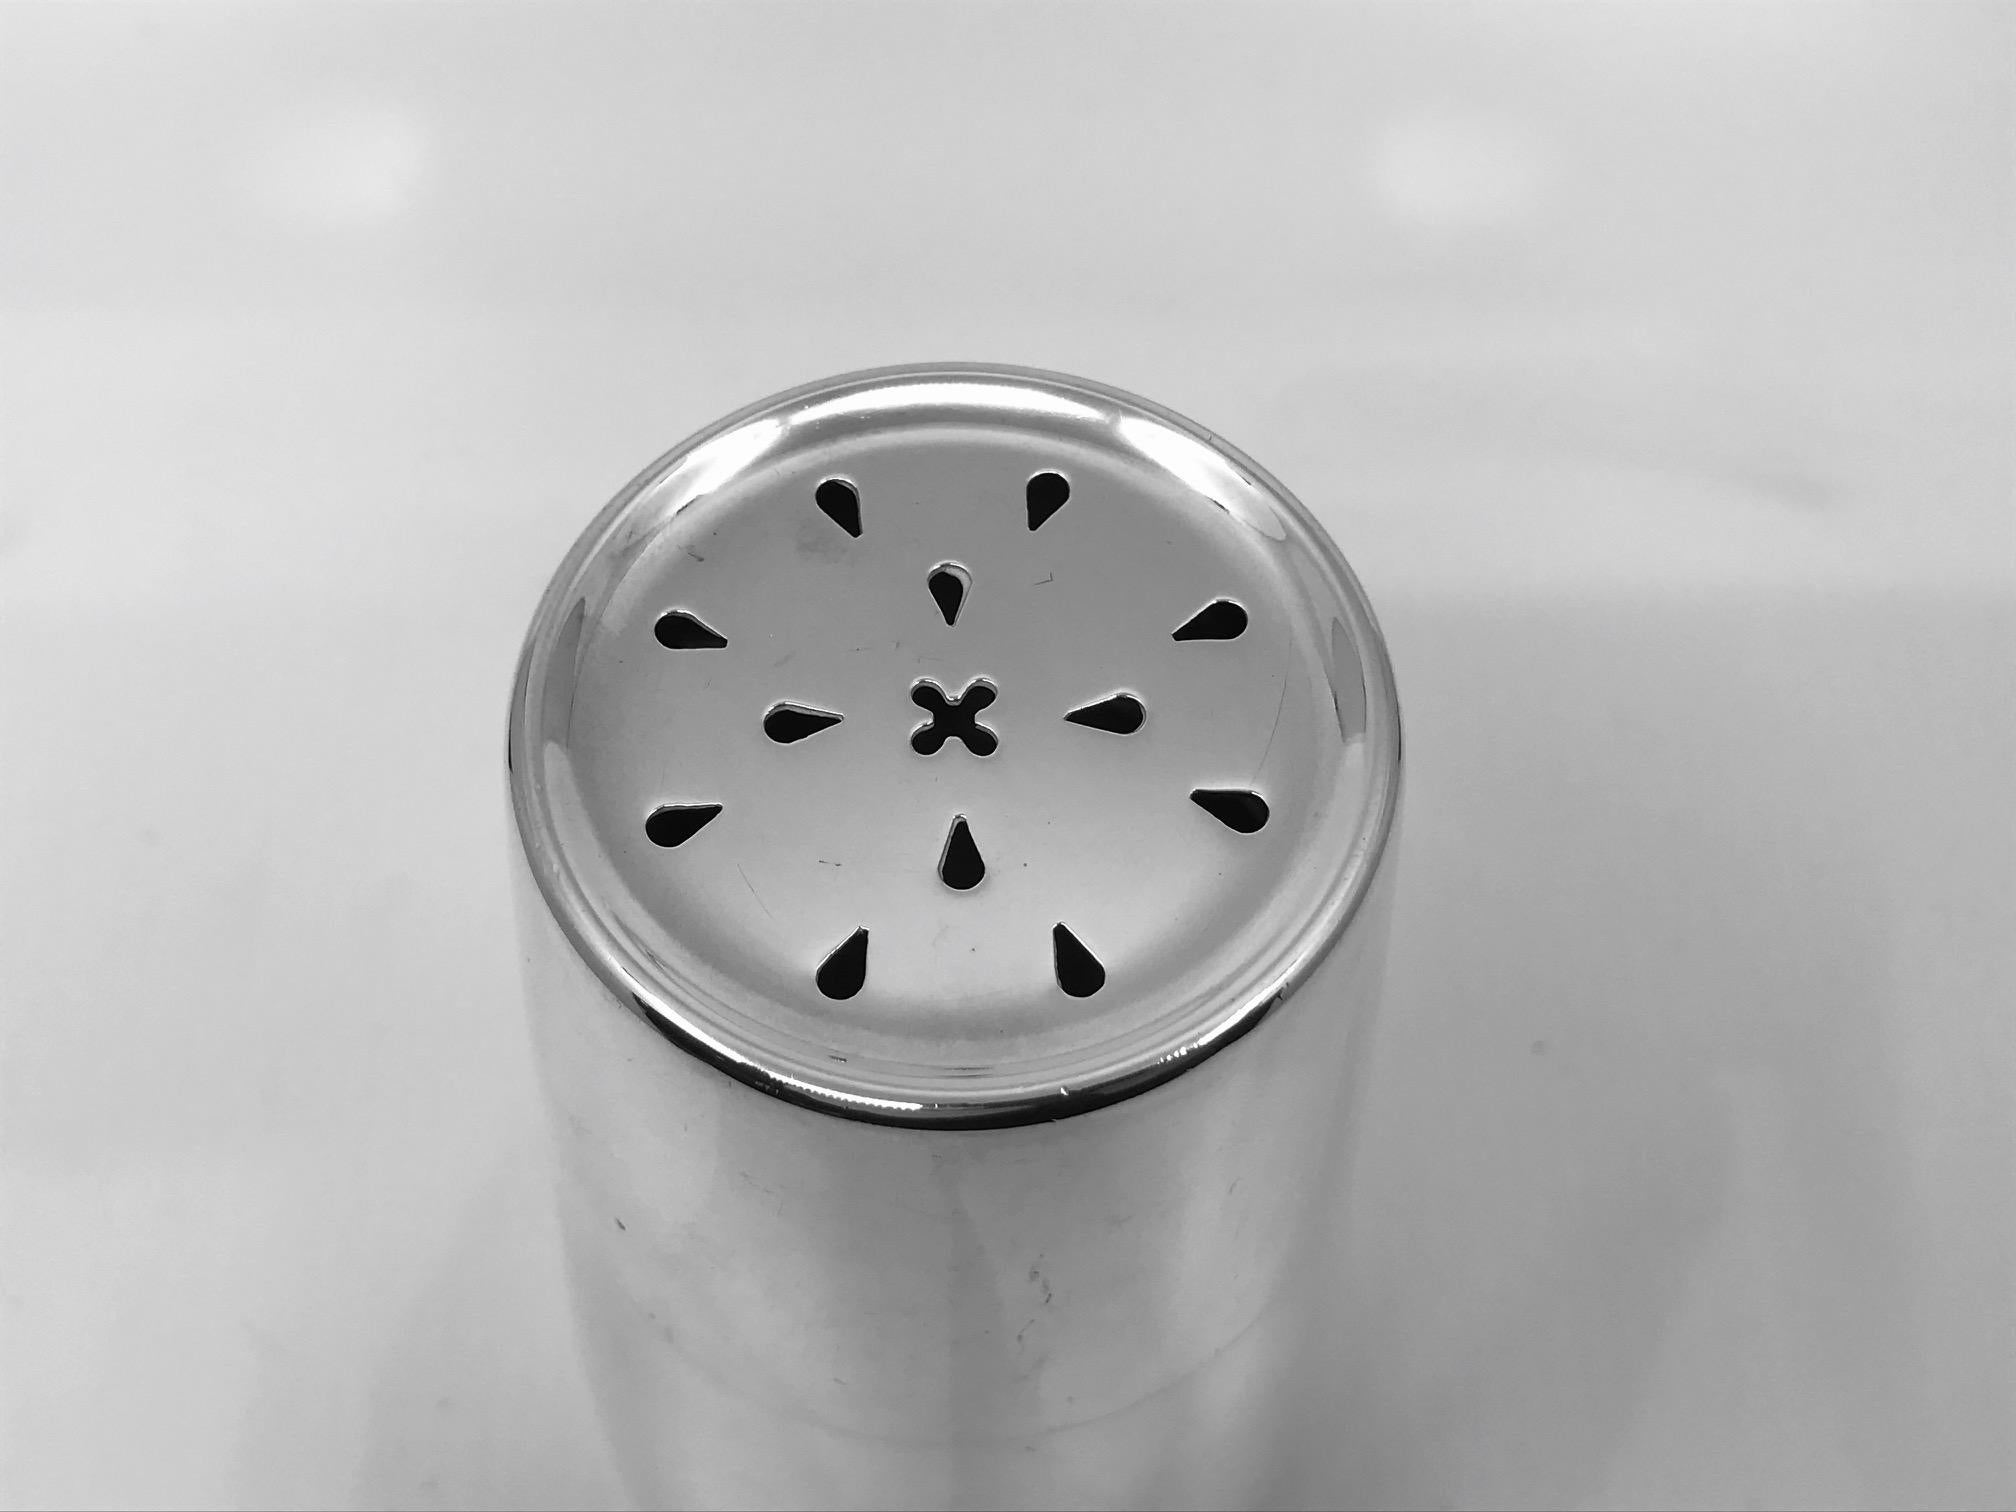 This is a rare midcentury sterling silver Georg Jensen sugar caster, design #1024 by Magnus Stephensen from circa 1953.

Measure: 5 1/8? in height, 2 3/4? diameter at base and 2 1/8? diameter at top (13cm, 7cm, 5.5cm).

Vintage Georg Jensen